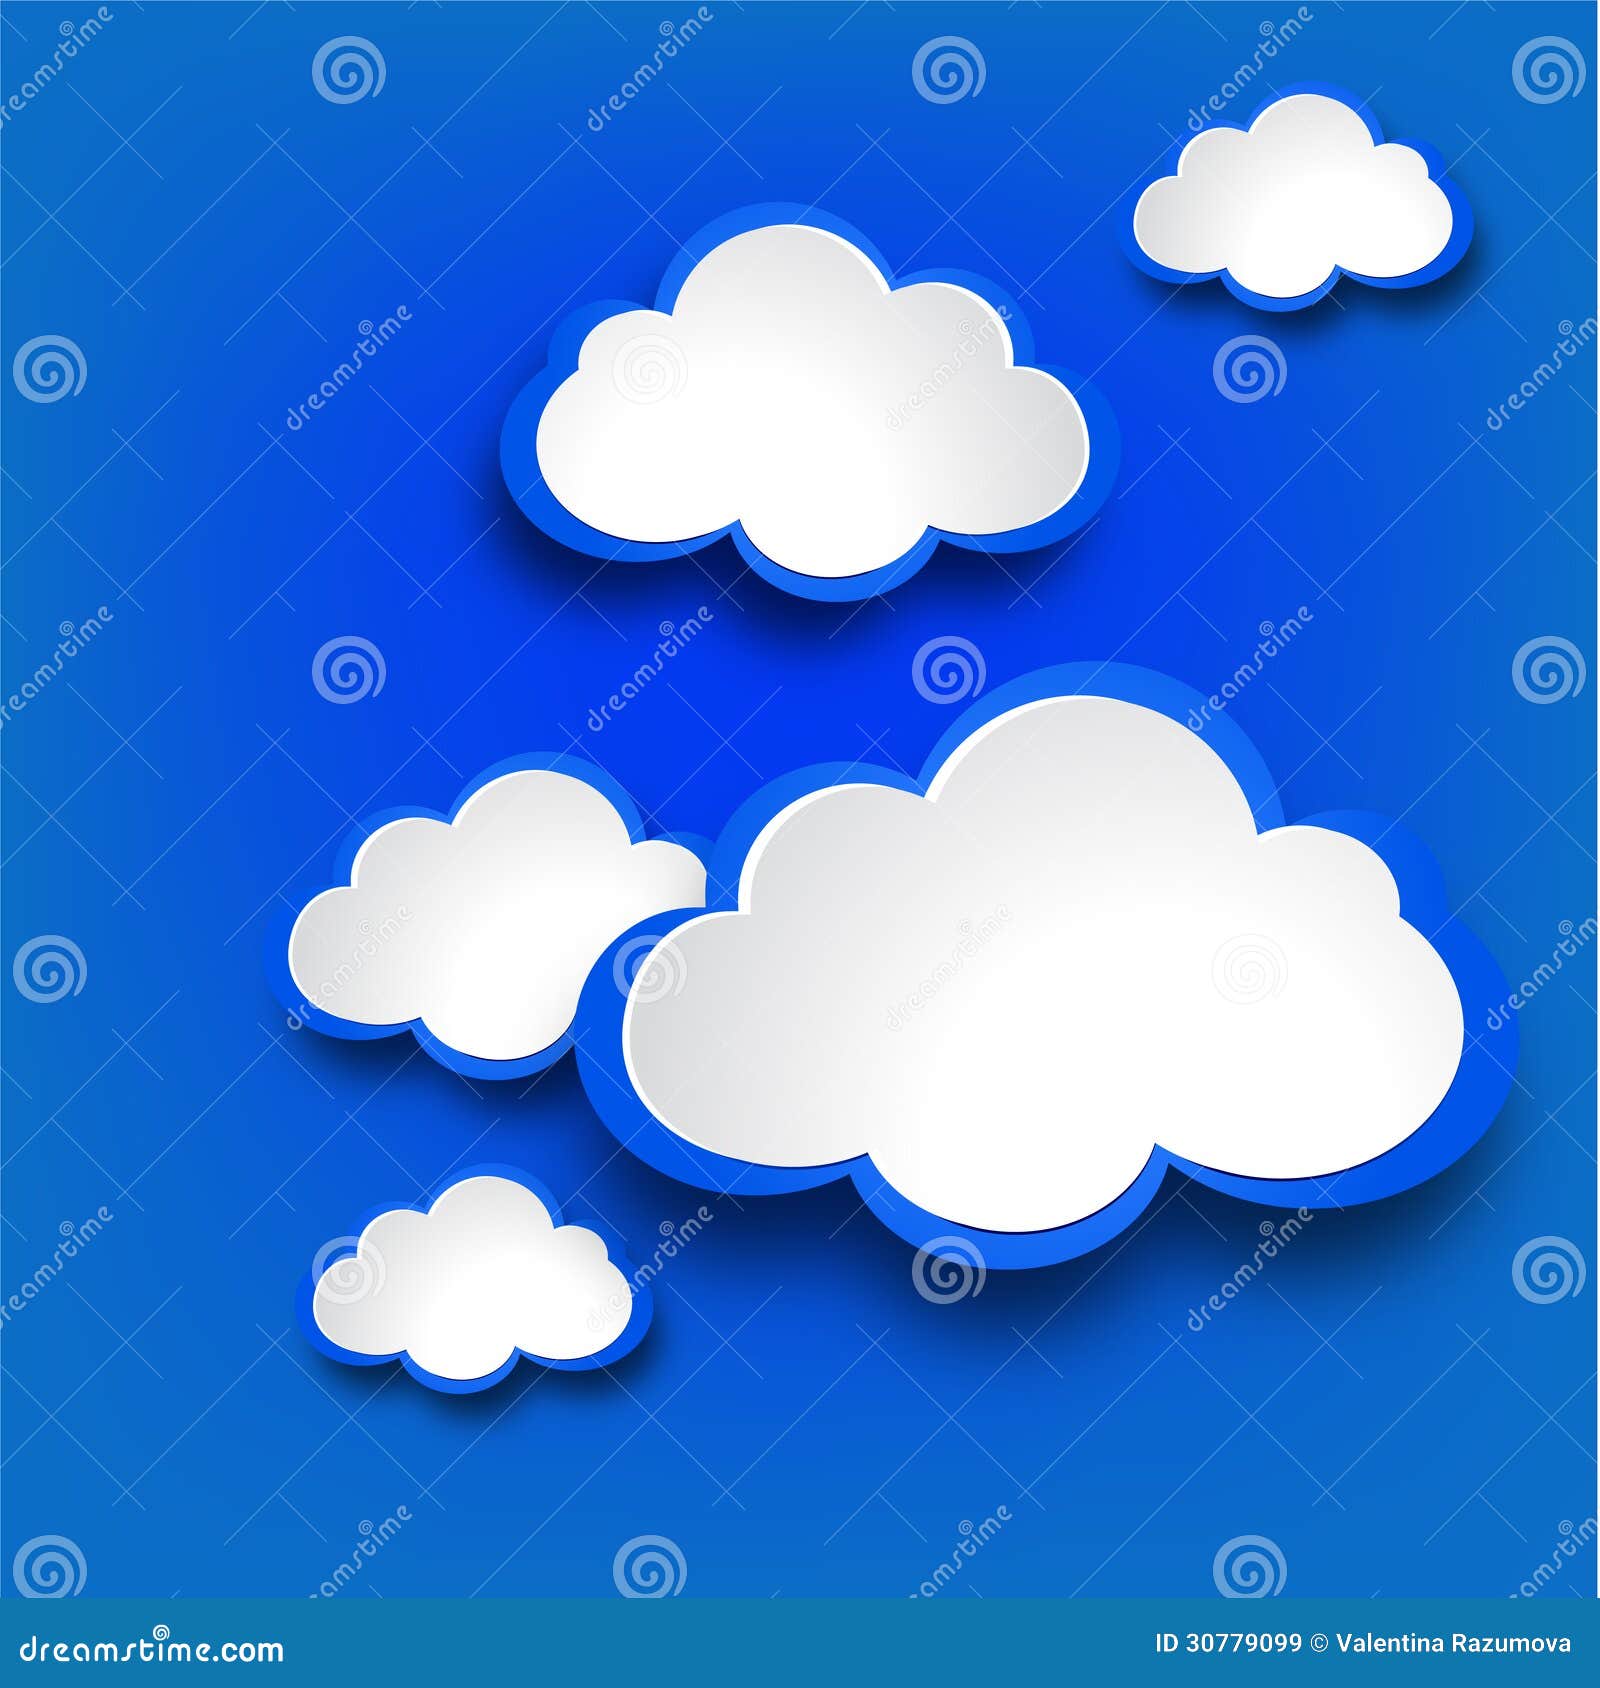 clouds tumblr Background  Clouds Viewing  Vector Gallery